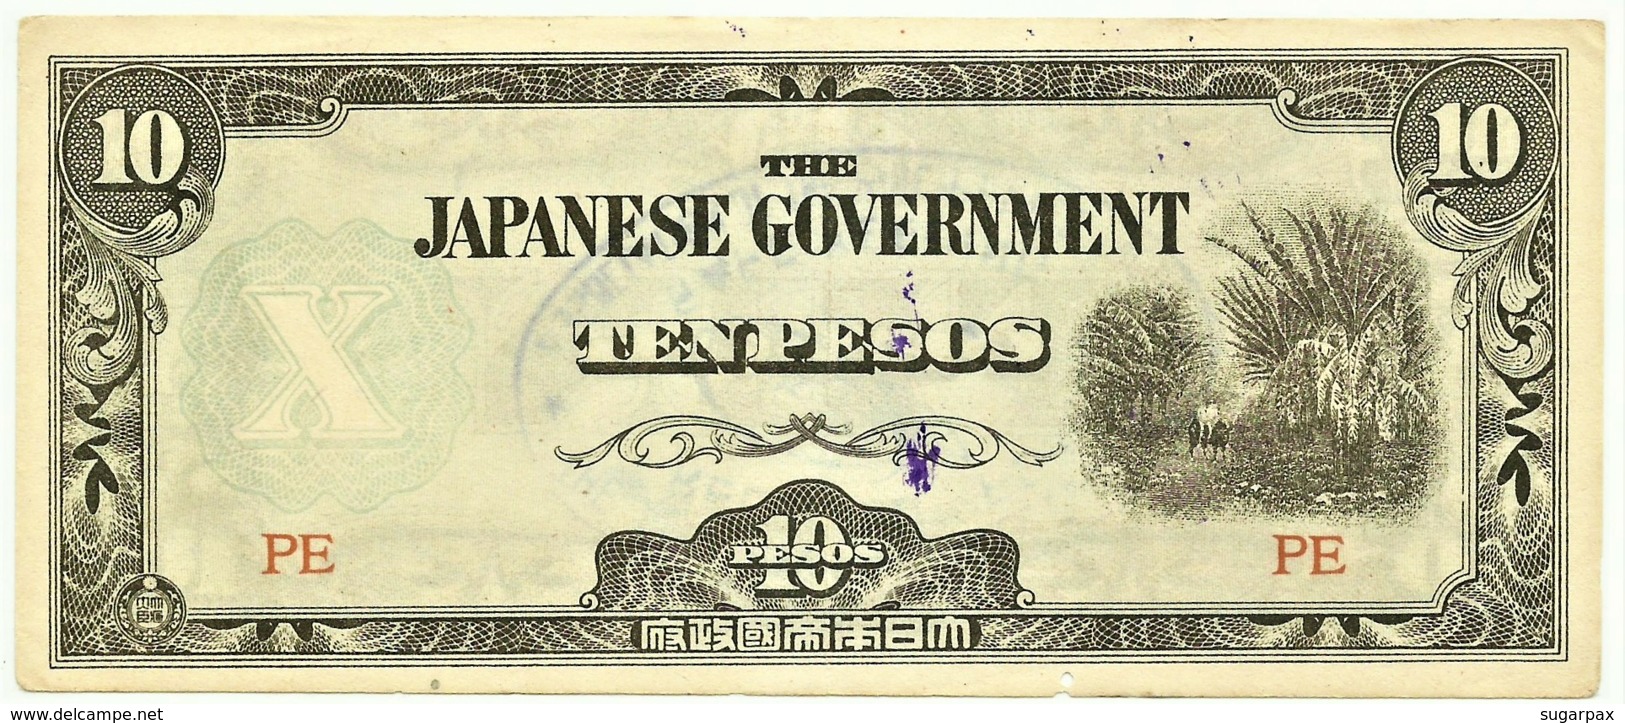 PHILIPPINES - 10 Pesos - ND ( 1942 ) WWII - Pick 108.b - With OVERPRINT - Serie PE - Japanese Occupation - Philippines